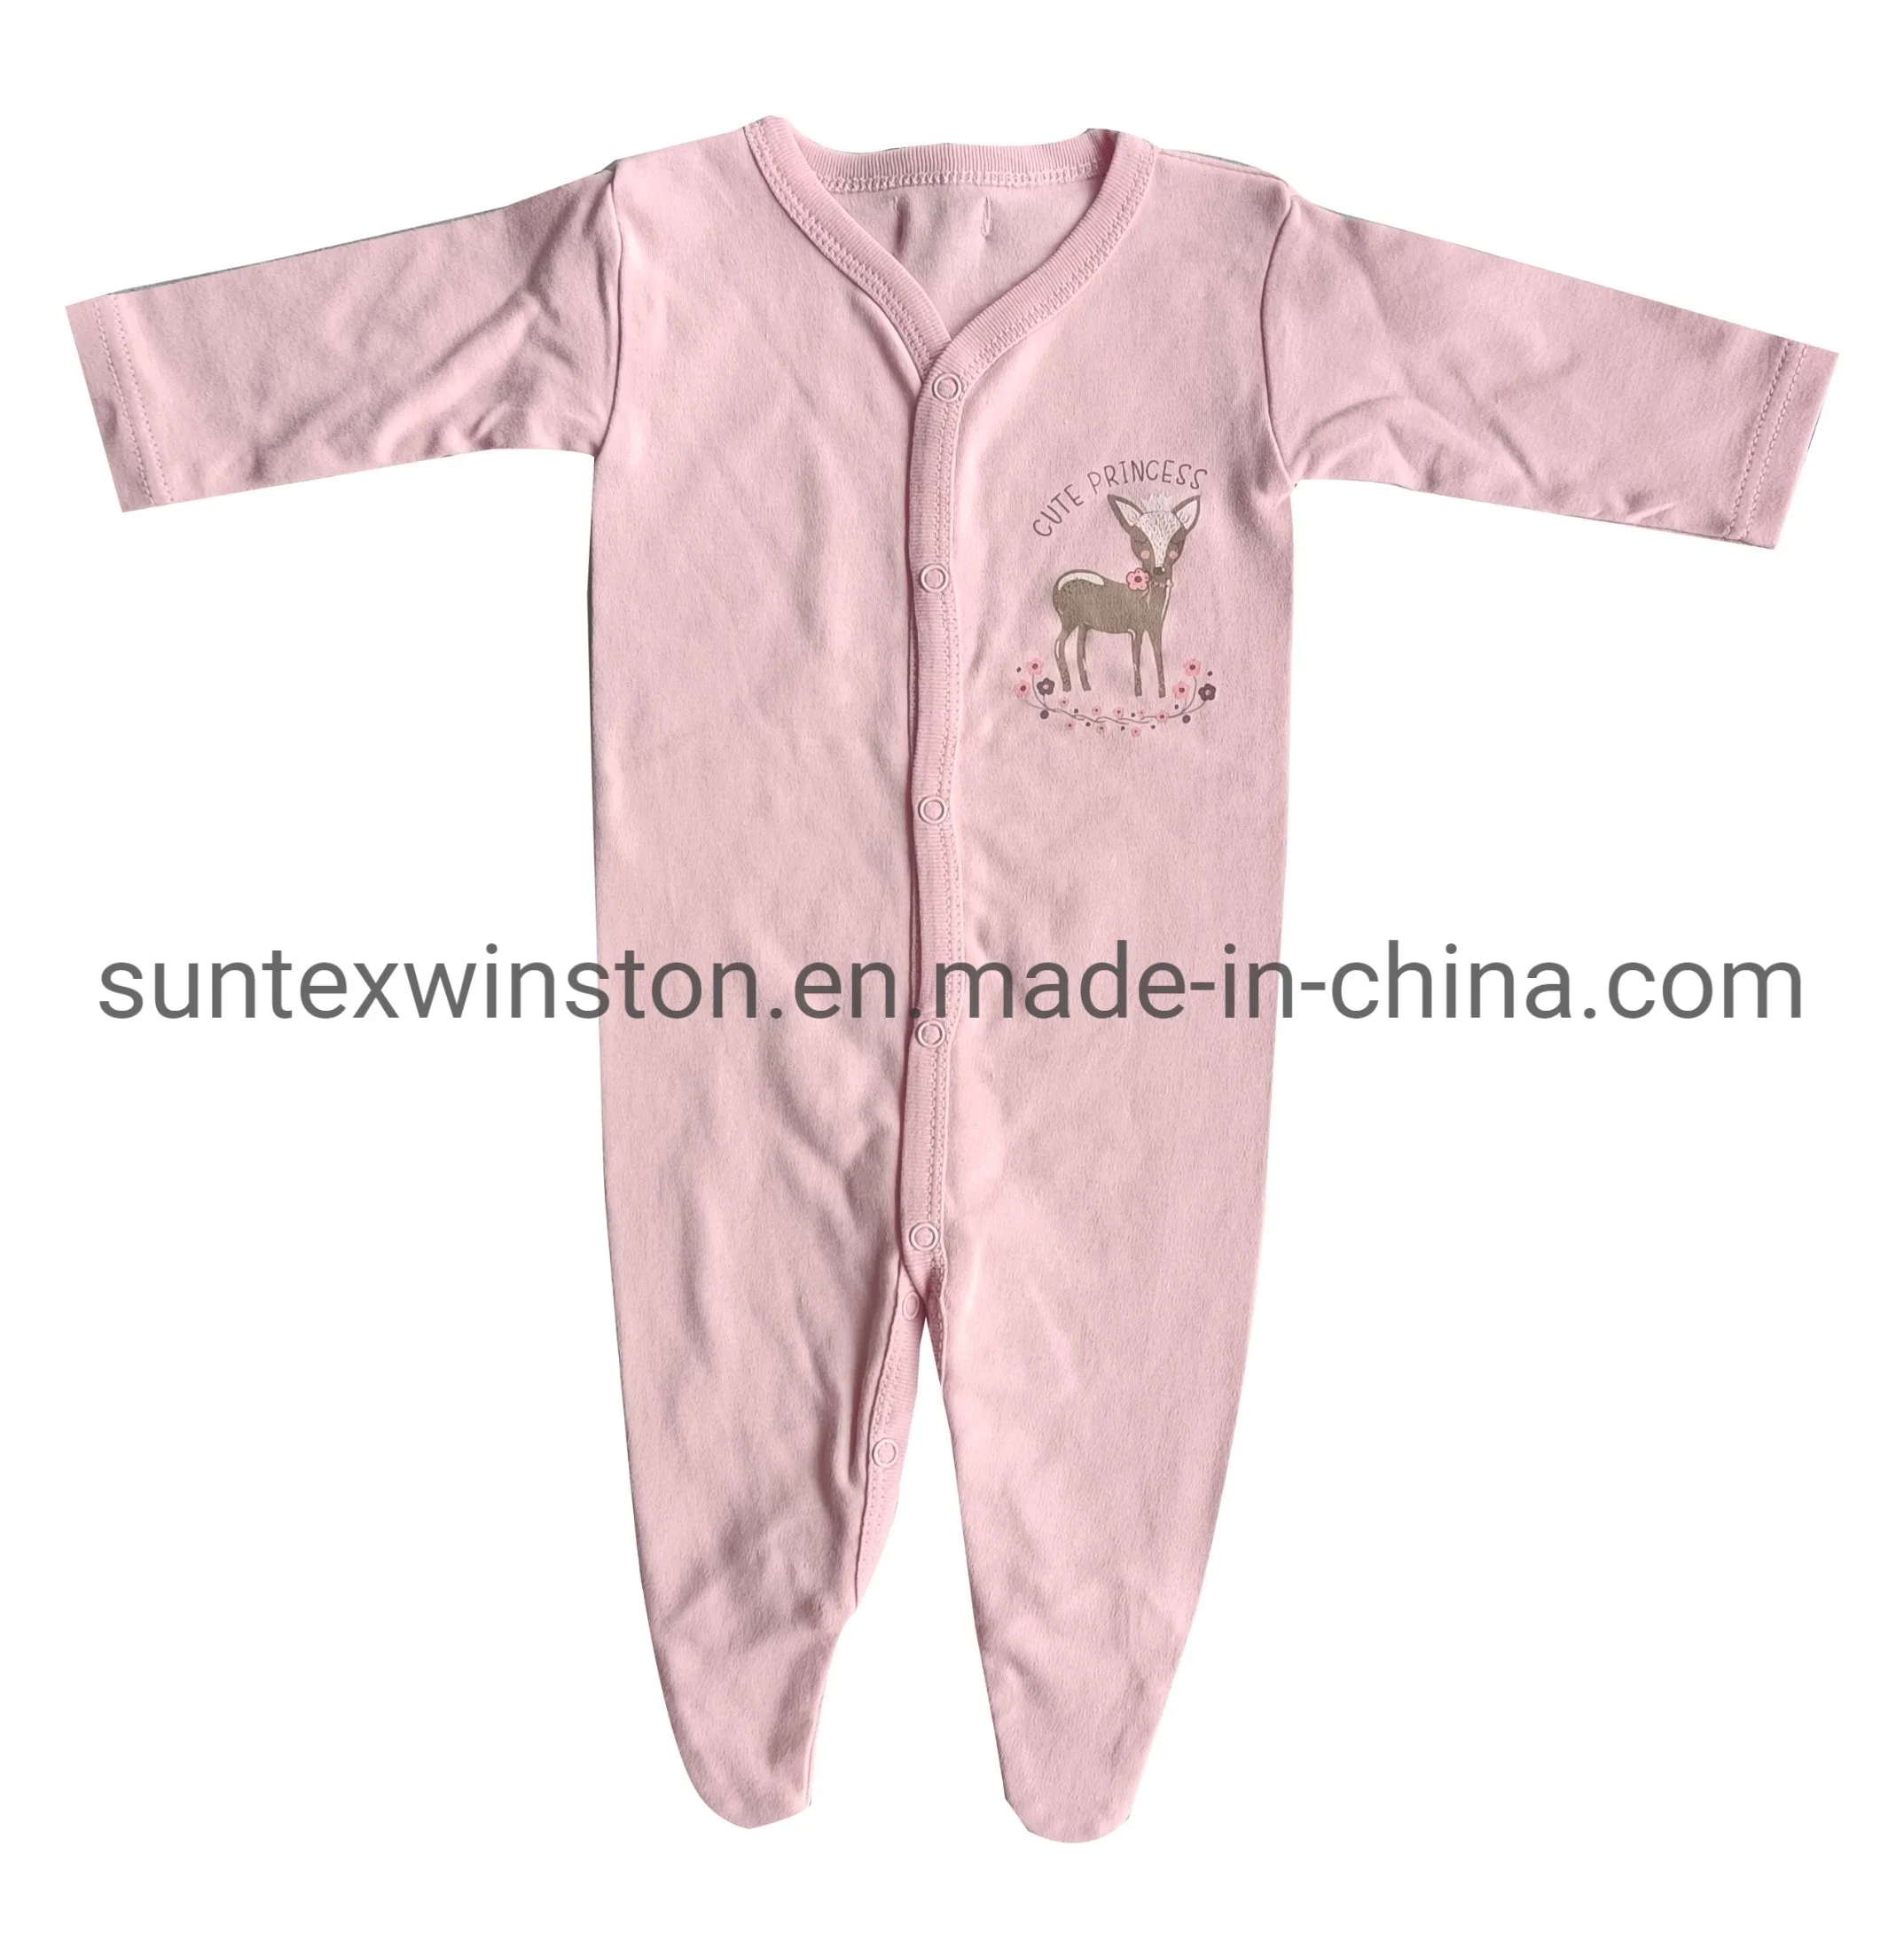 100% Cotton Baby Bodysuit Baby Clothes Baby Garment